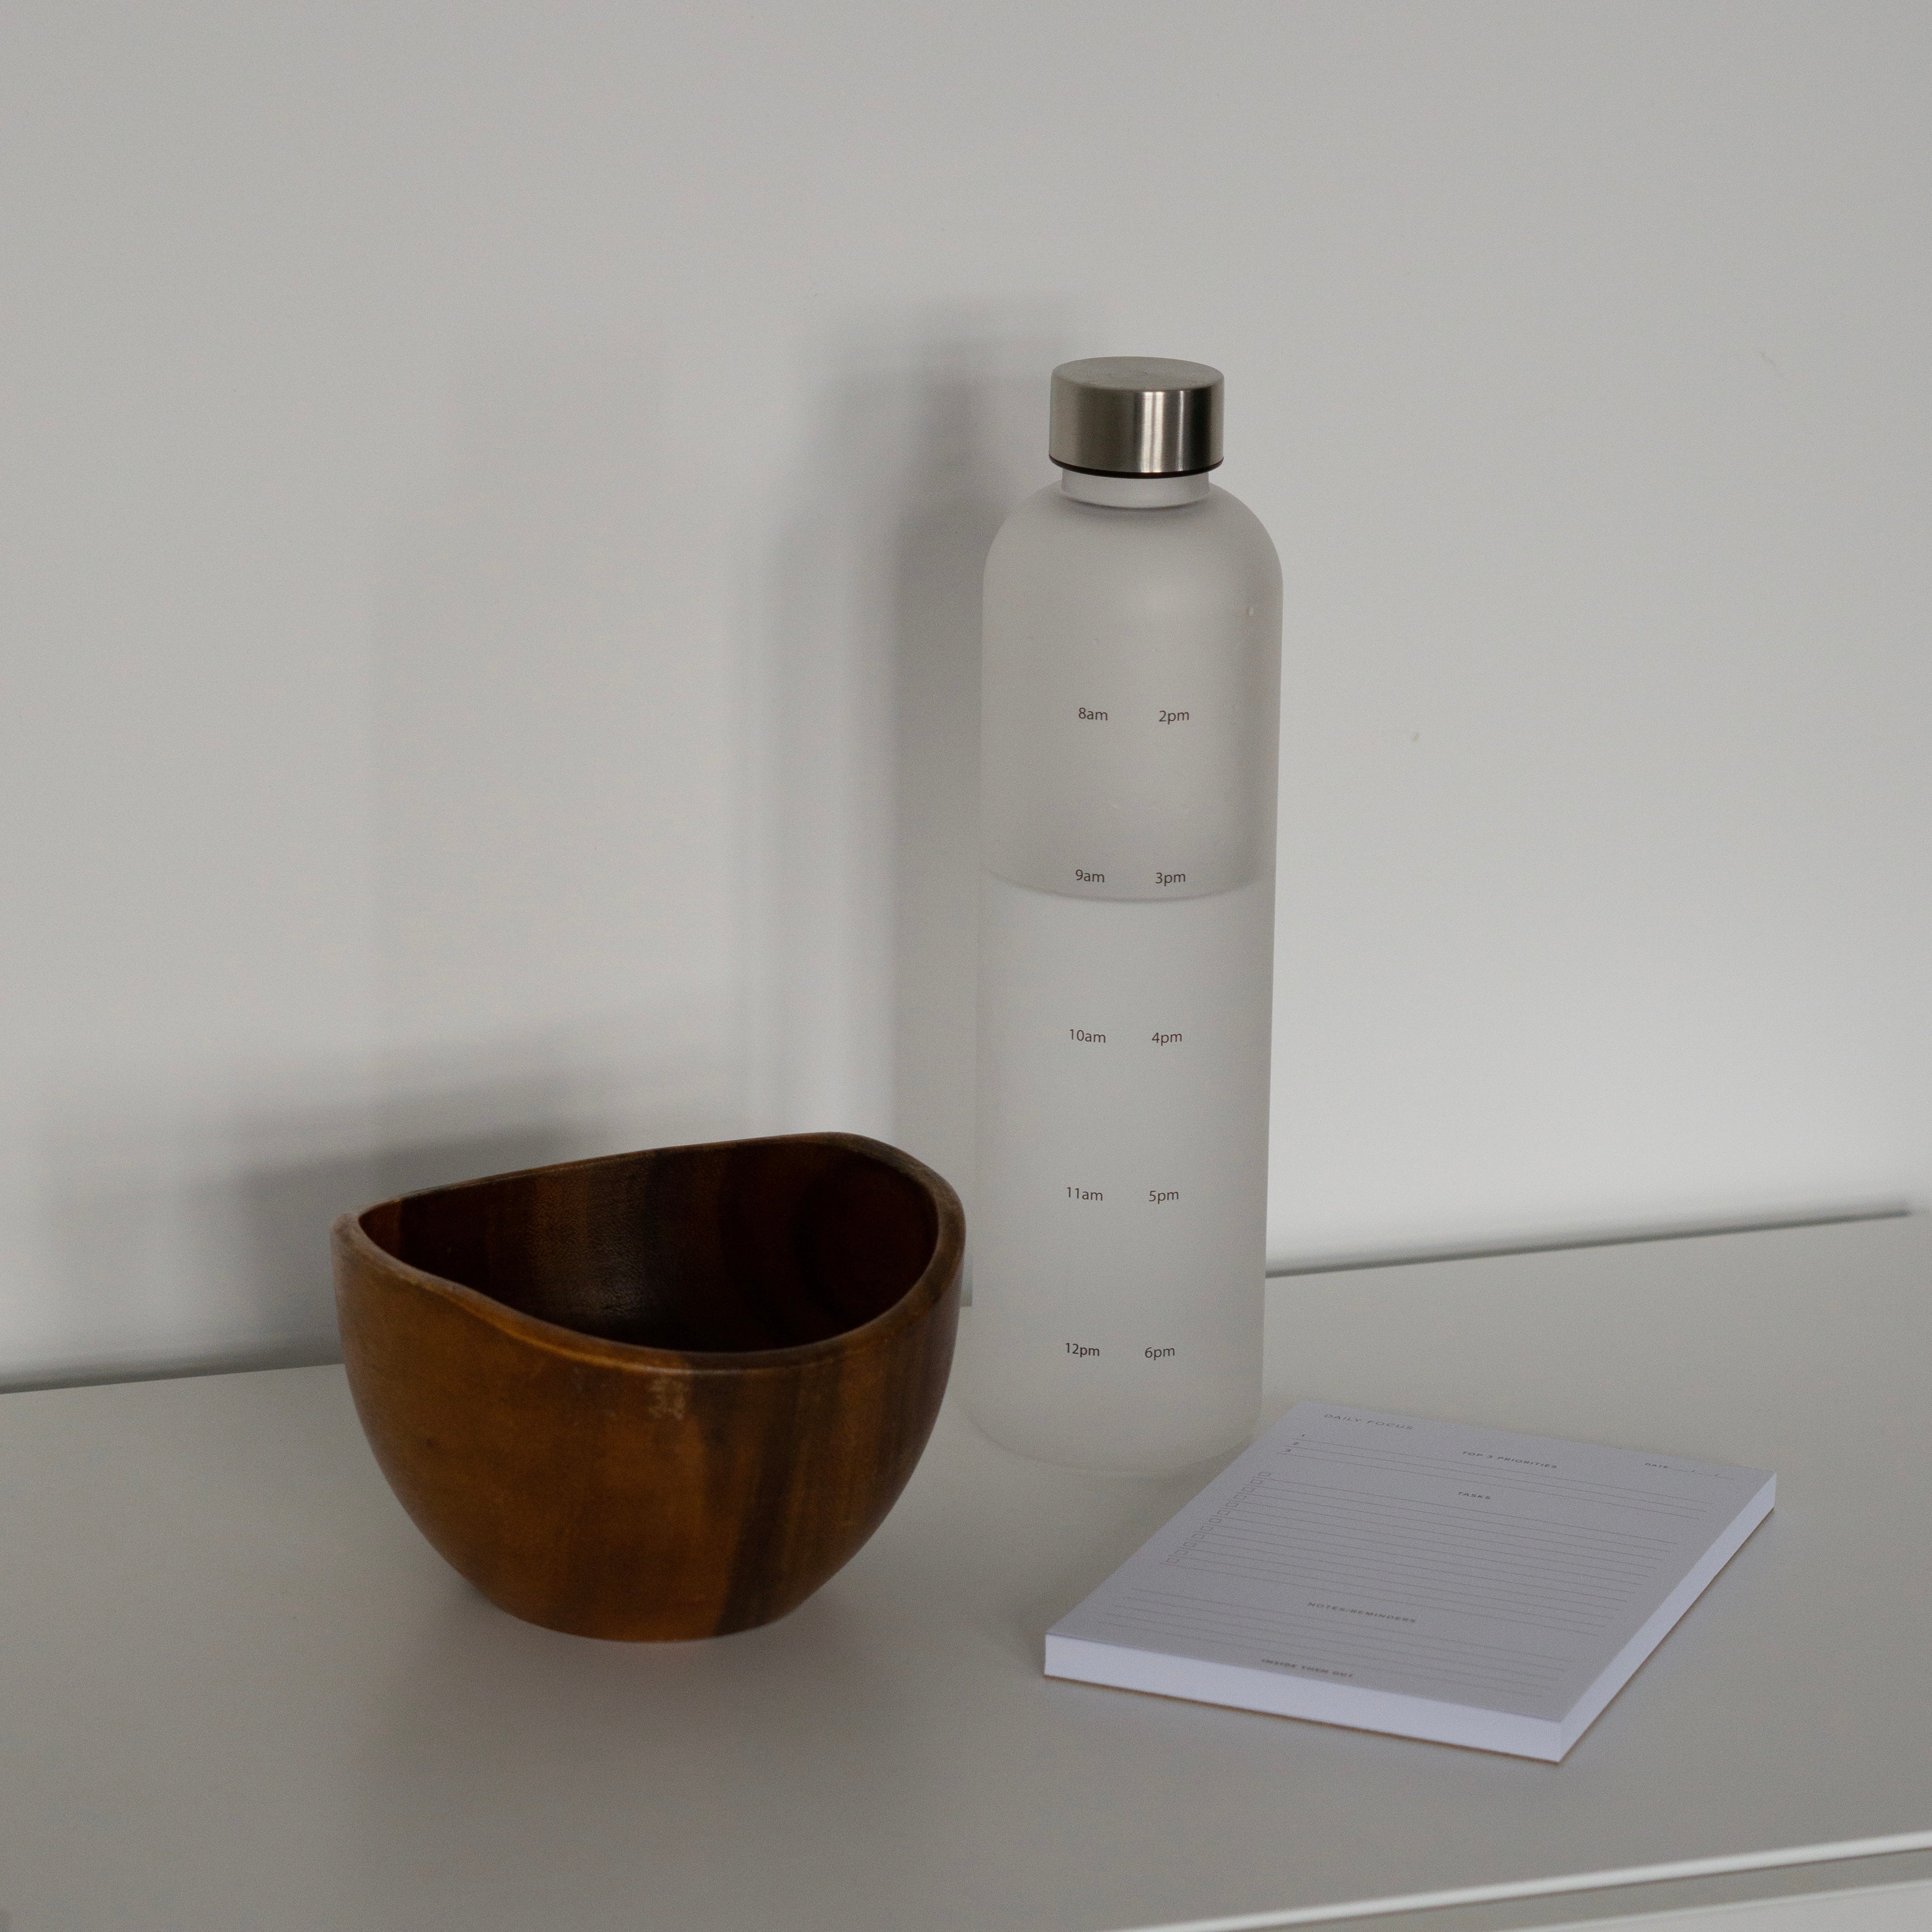 Daily Focus Notepad and Water Tracking Bottle on off-white table